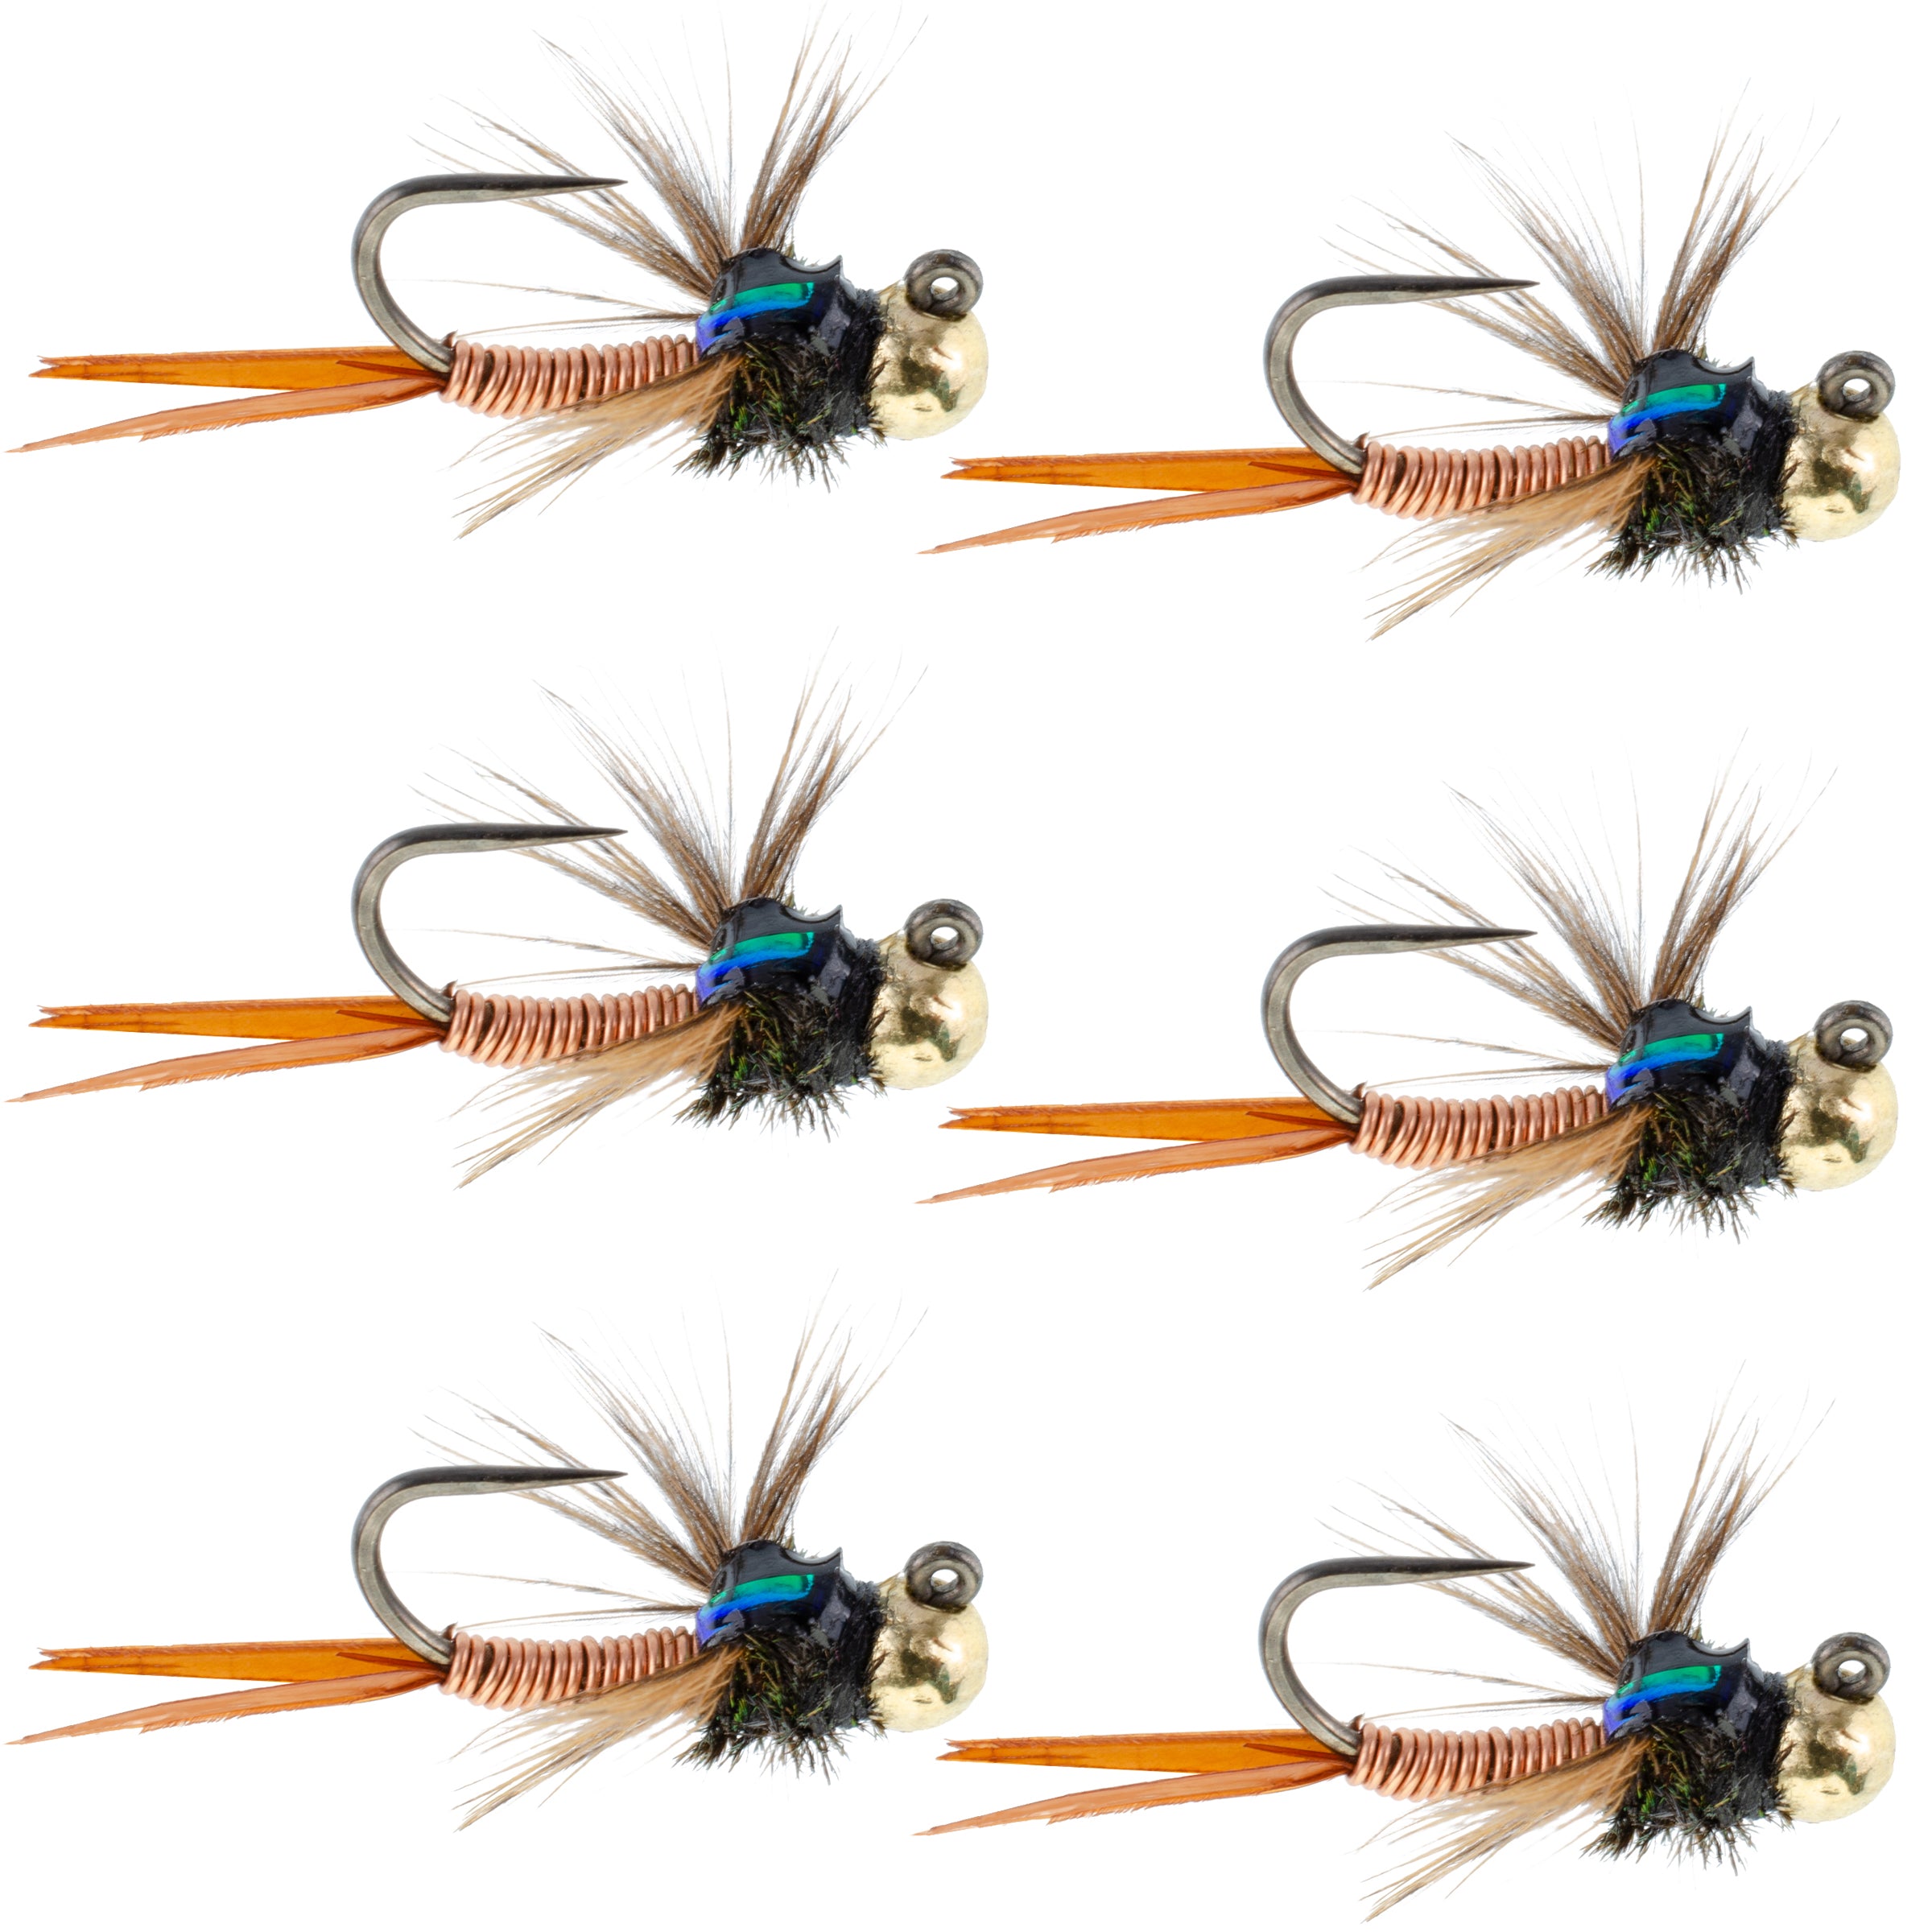 http://theflyfishingplace.com/cdn/shop/products/Tactical-Tungsten-Copper-John-Copper-Nymph-Set-of-6-Fly-Fishing-Flies.jpg?v=1679855736